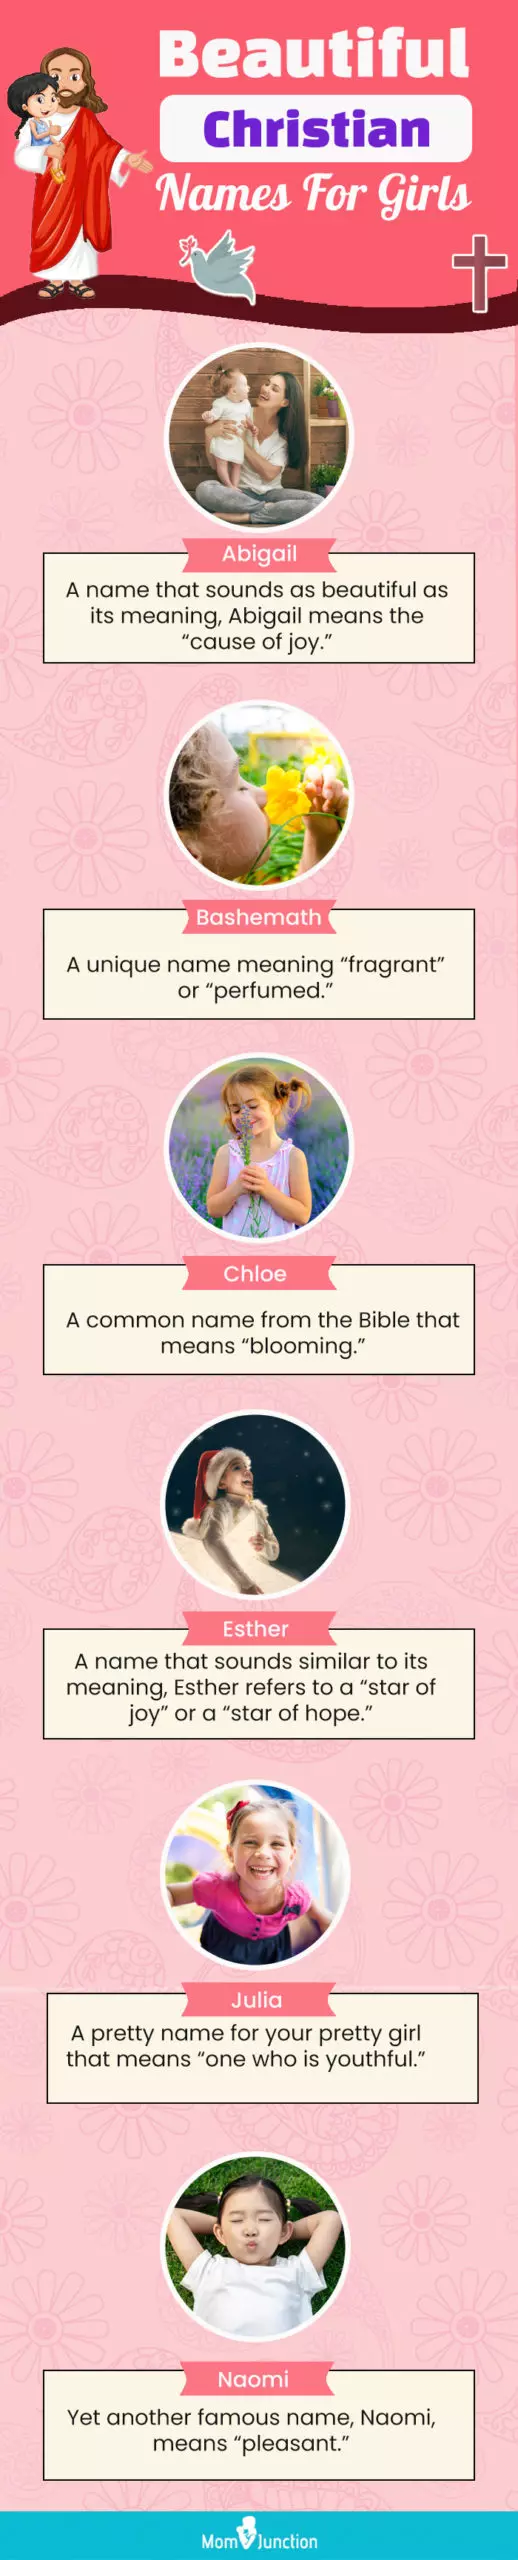 beautiful christian names for girls (infographic)